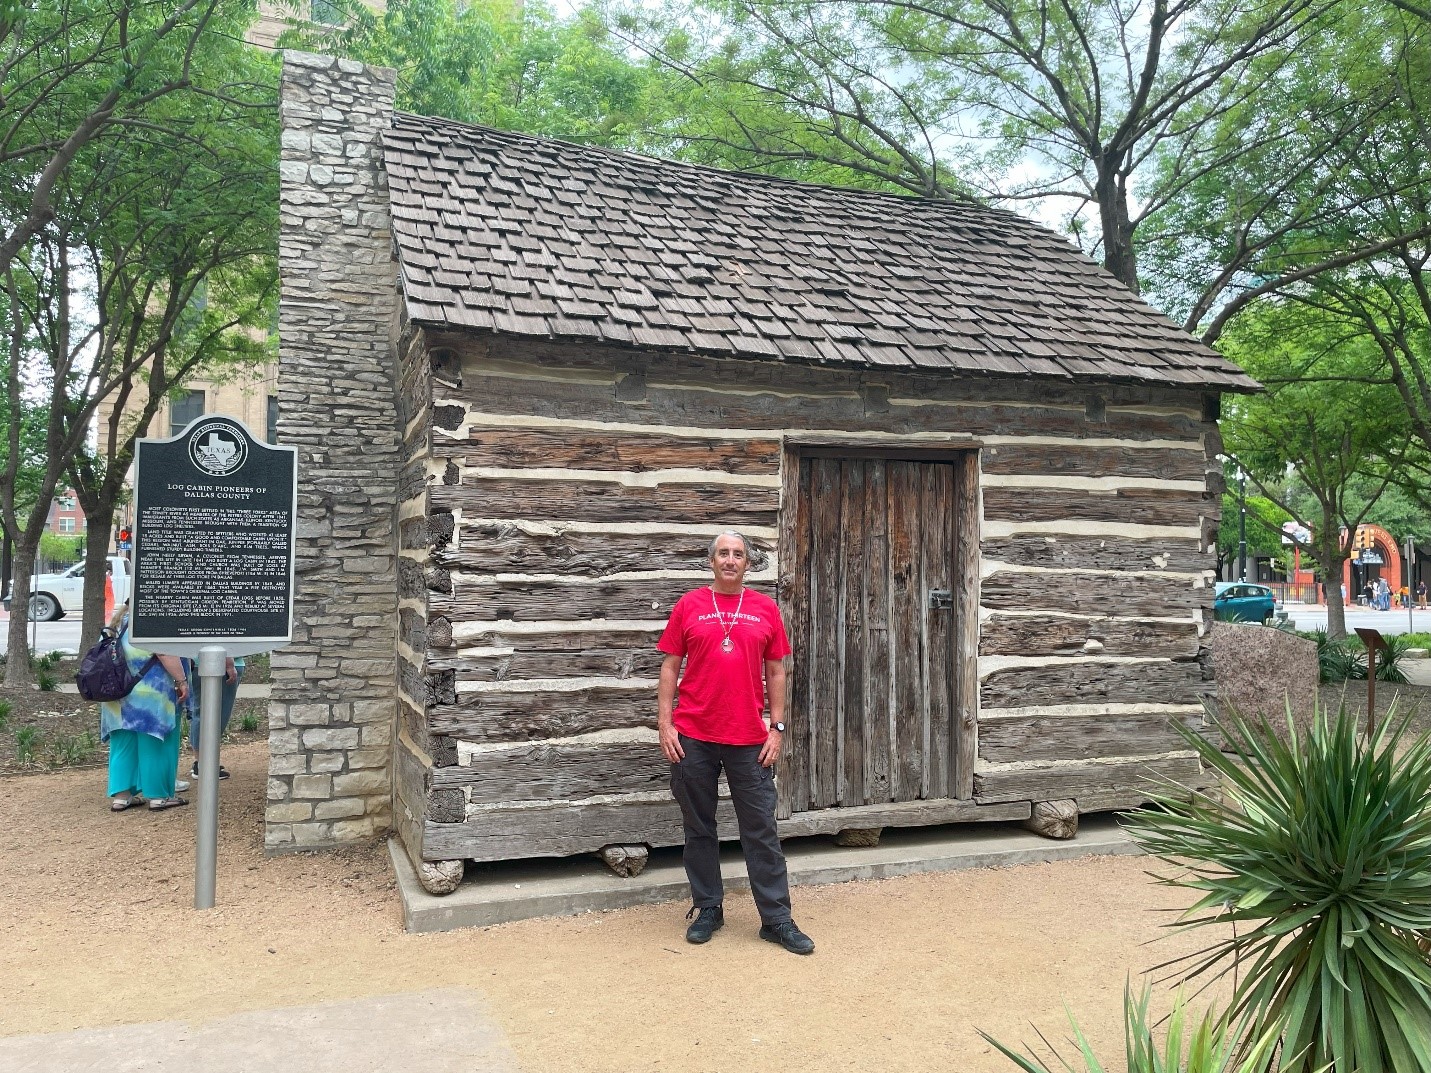 One of the earliest log cabins in Dallas. 